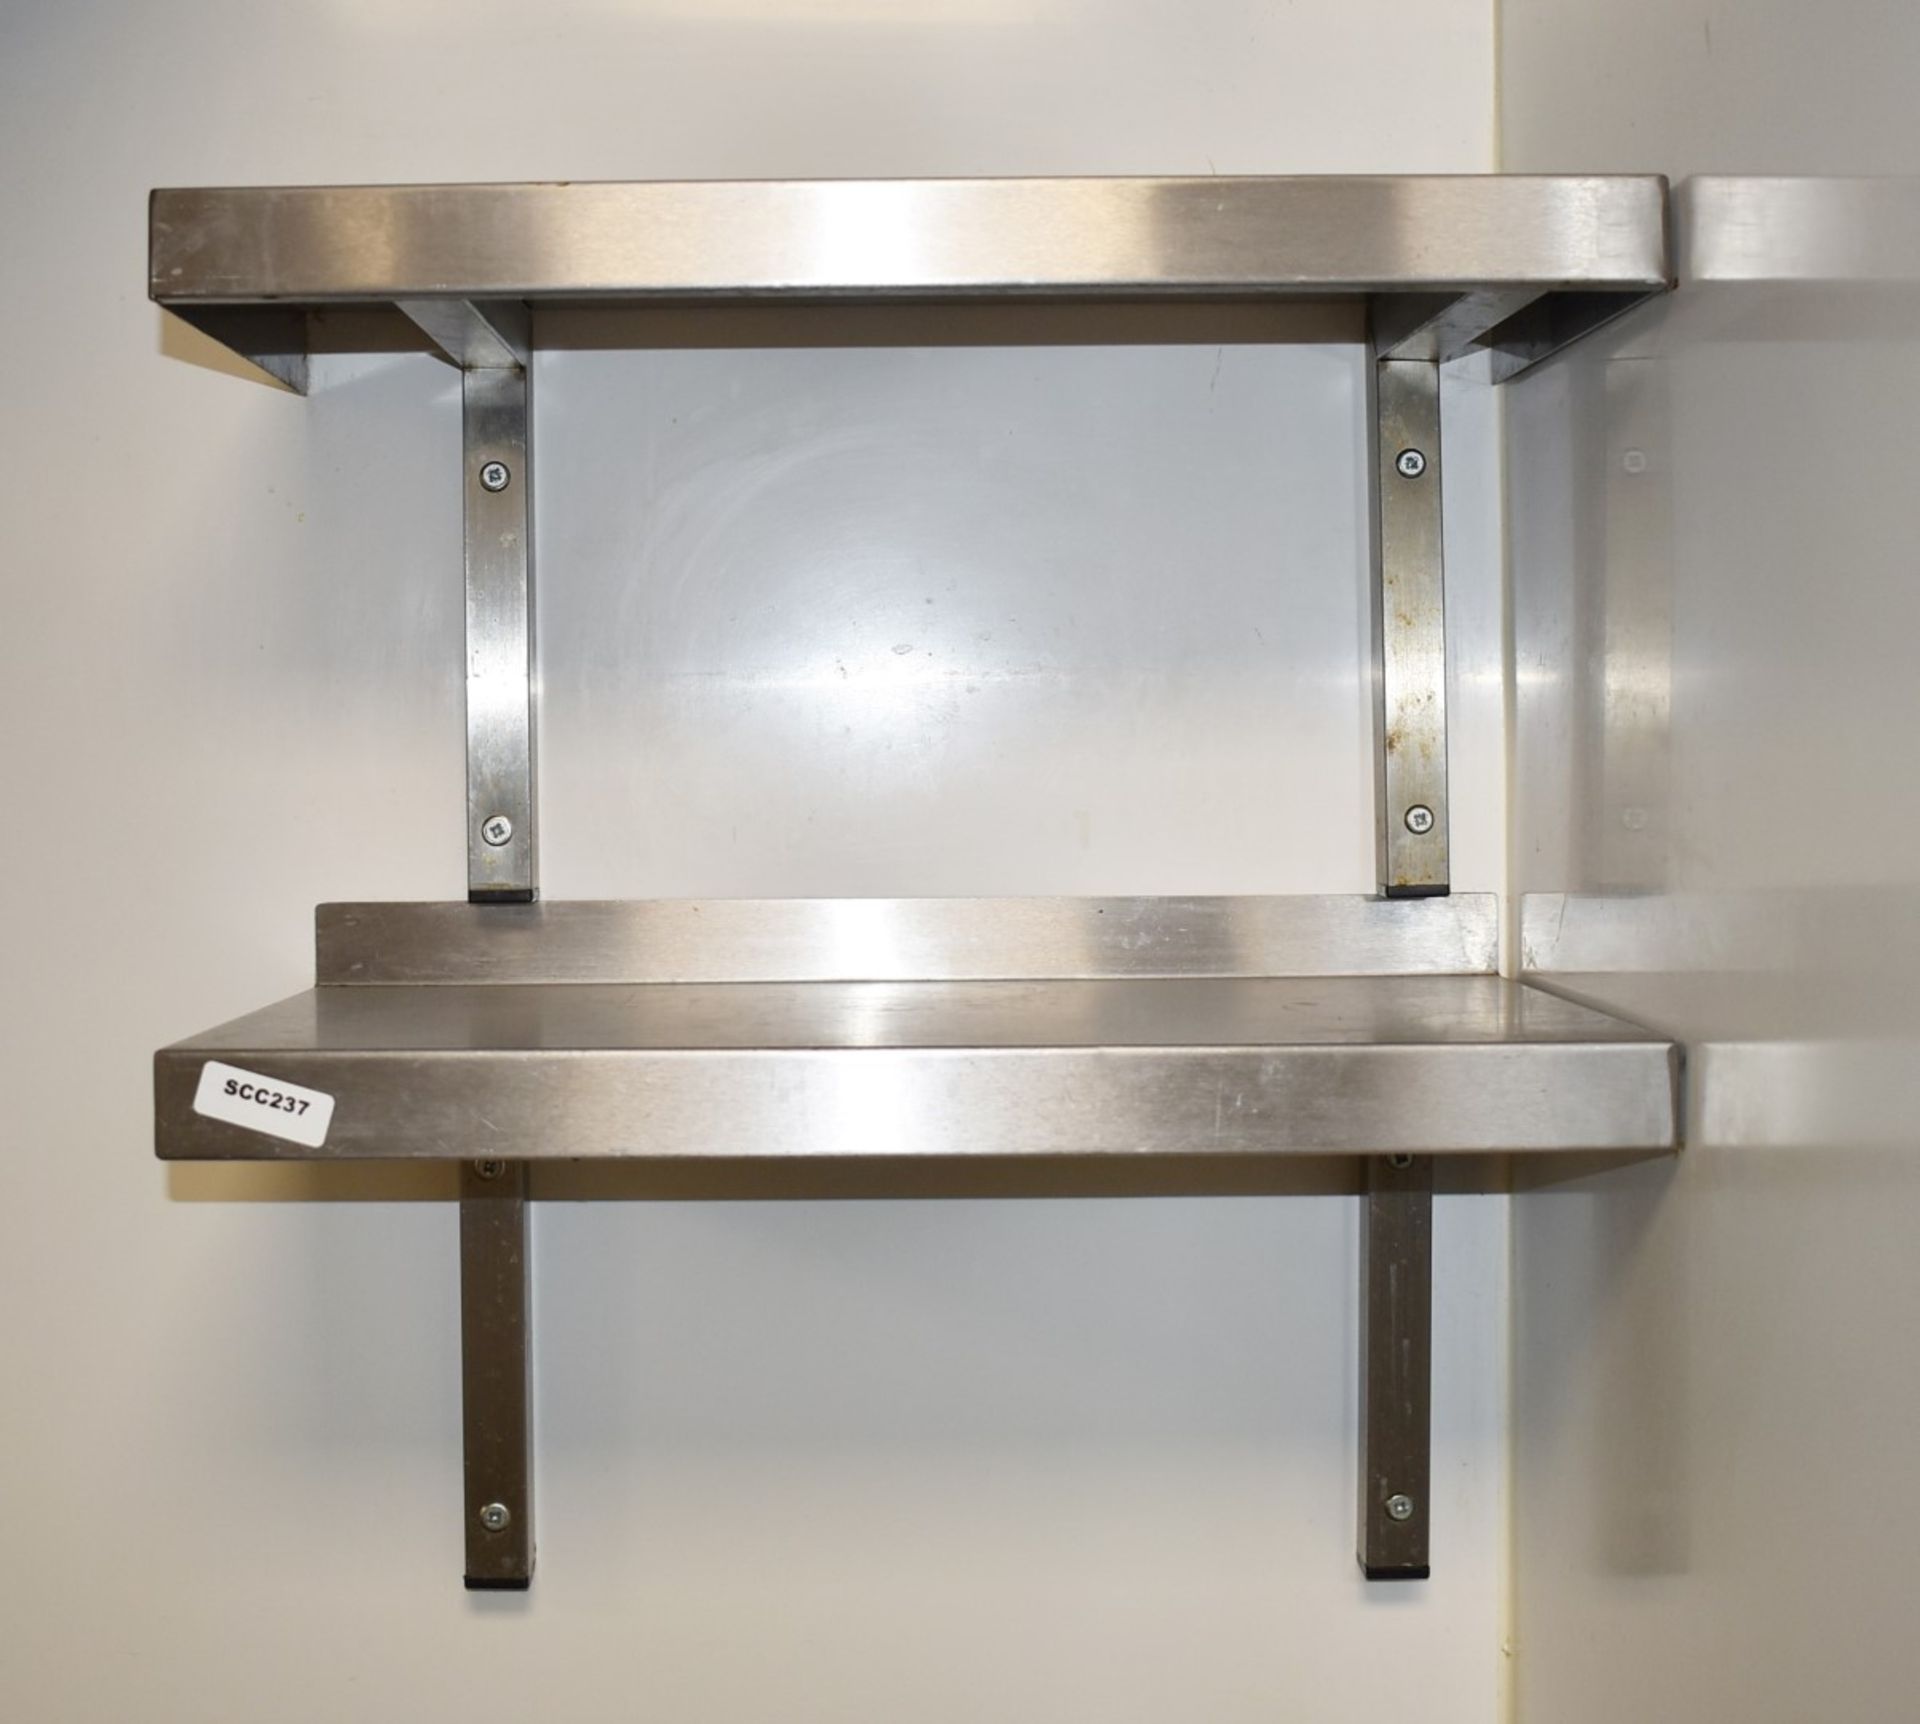 6 x Stainless Steel Wall Mounted Shelves With Mounting Brackets - Sizes W57/W104/W156 cms 2 of Each - Image 2 of 5